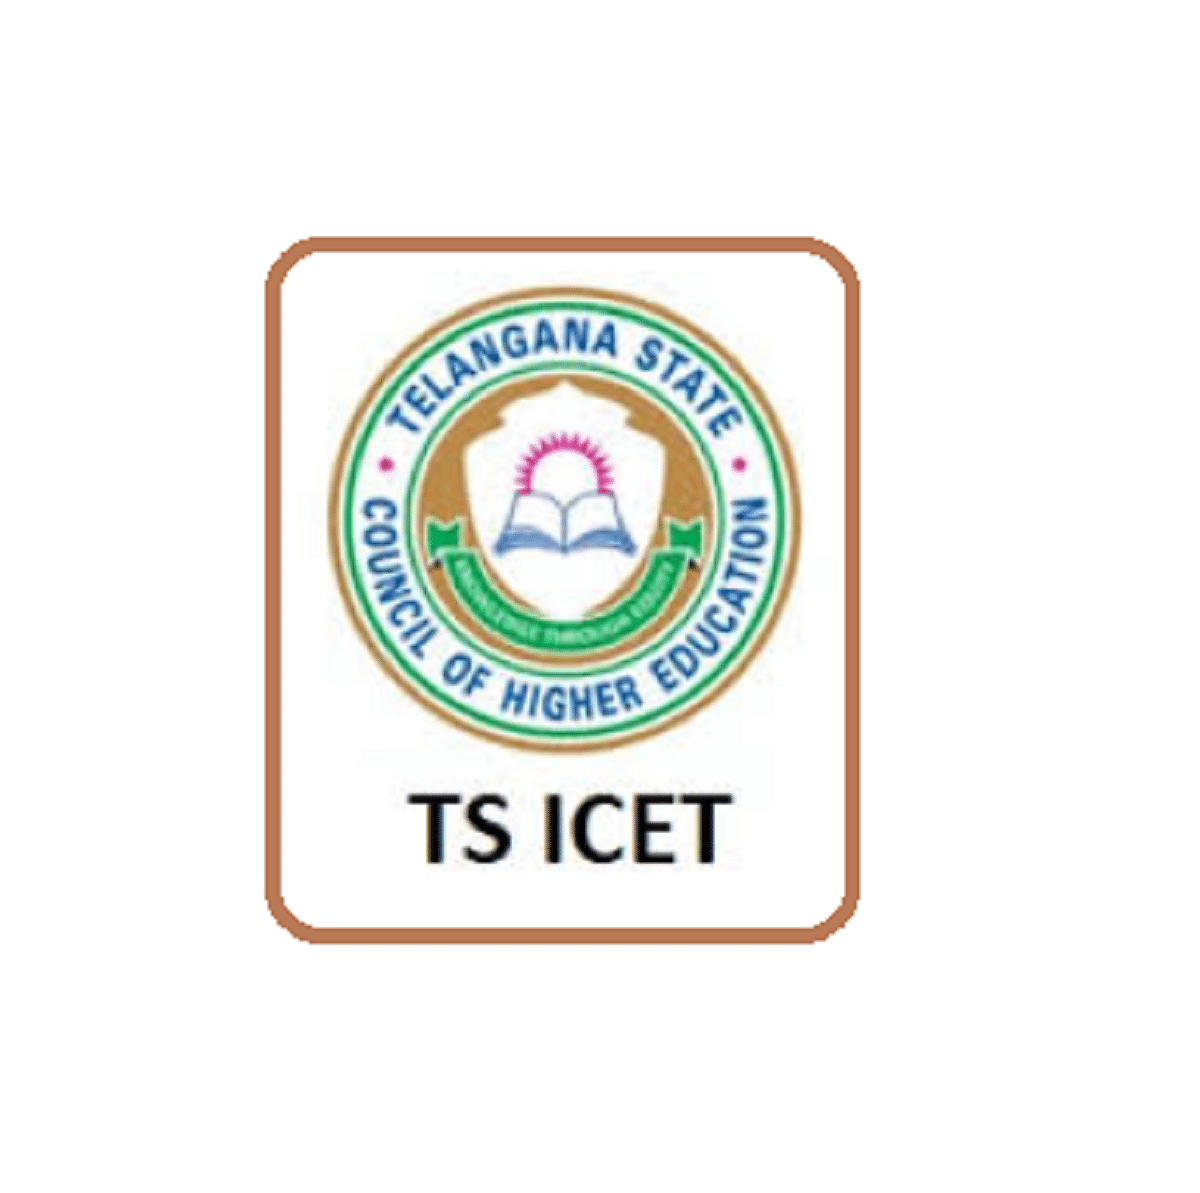 TS ICET Counselling Schedule 2021 Released, Check Dates Here